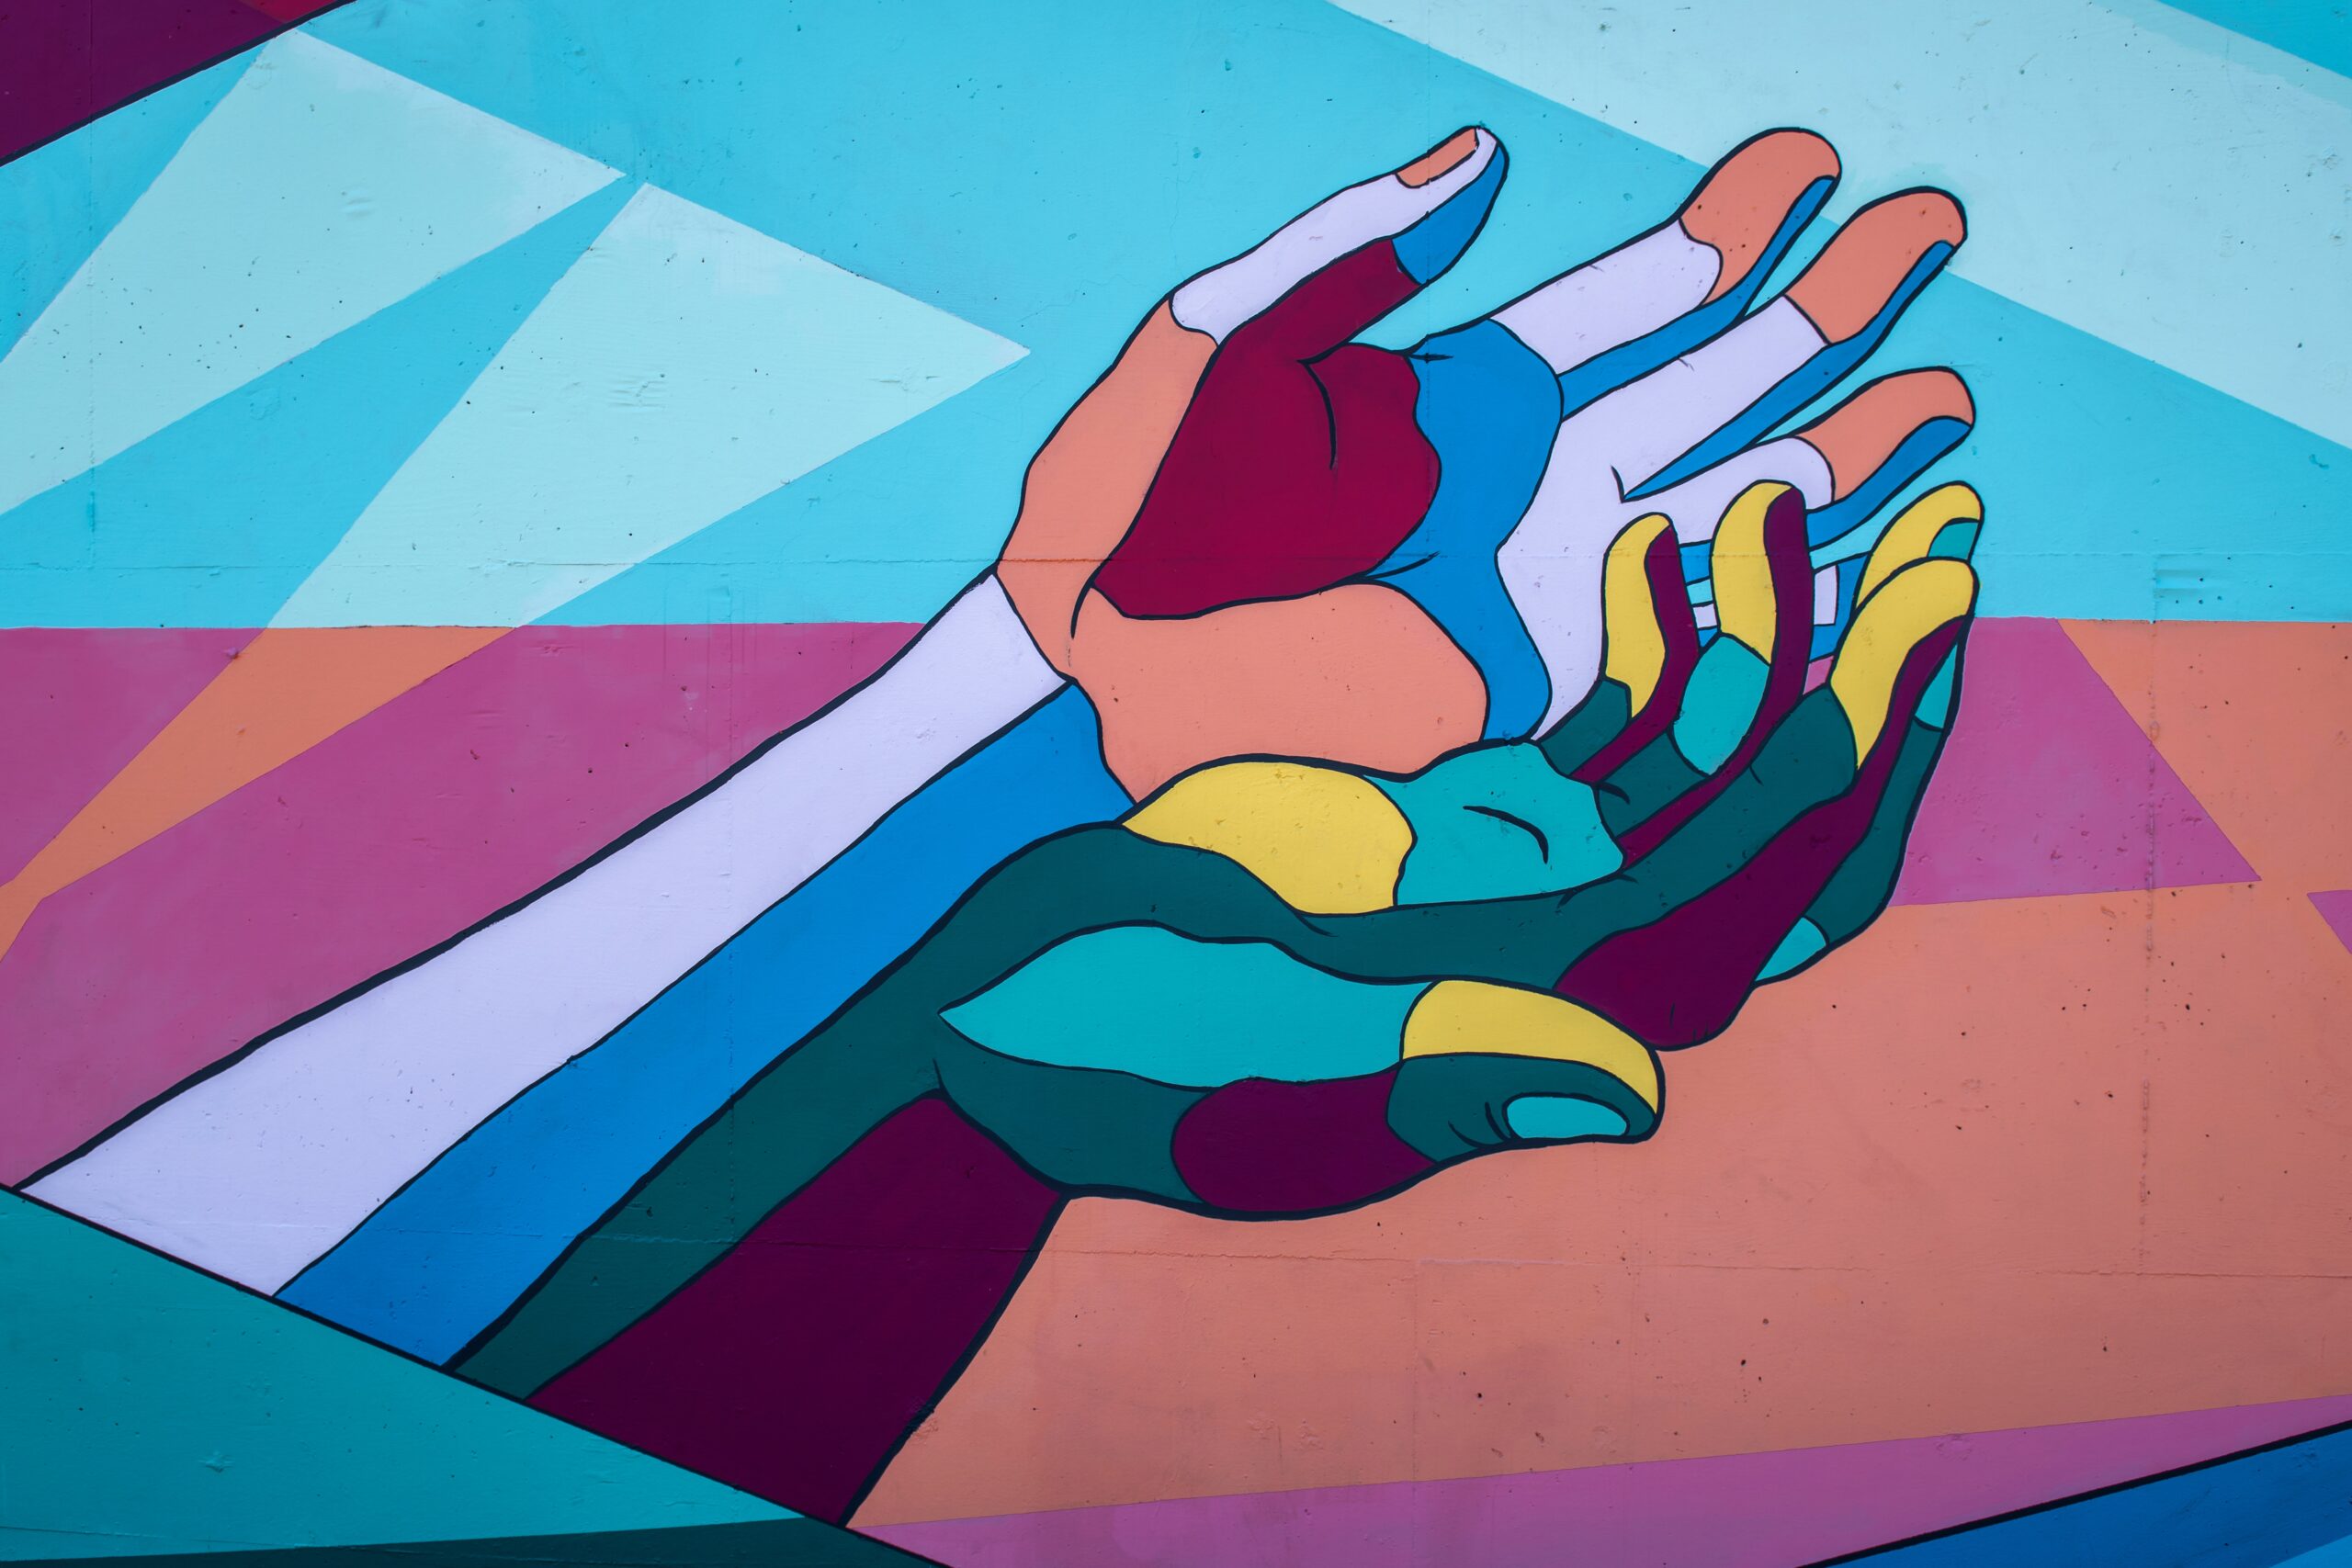 An abstract image of colourful hands to symbolize the need to keep them clean while keeping yourself mentally healthy.